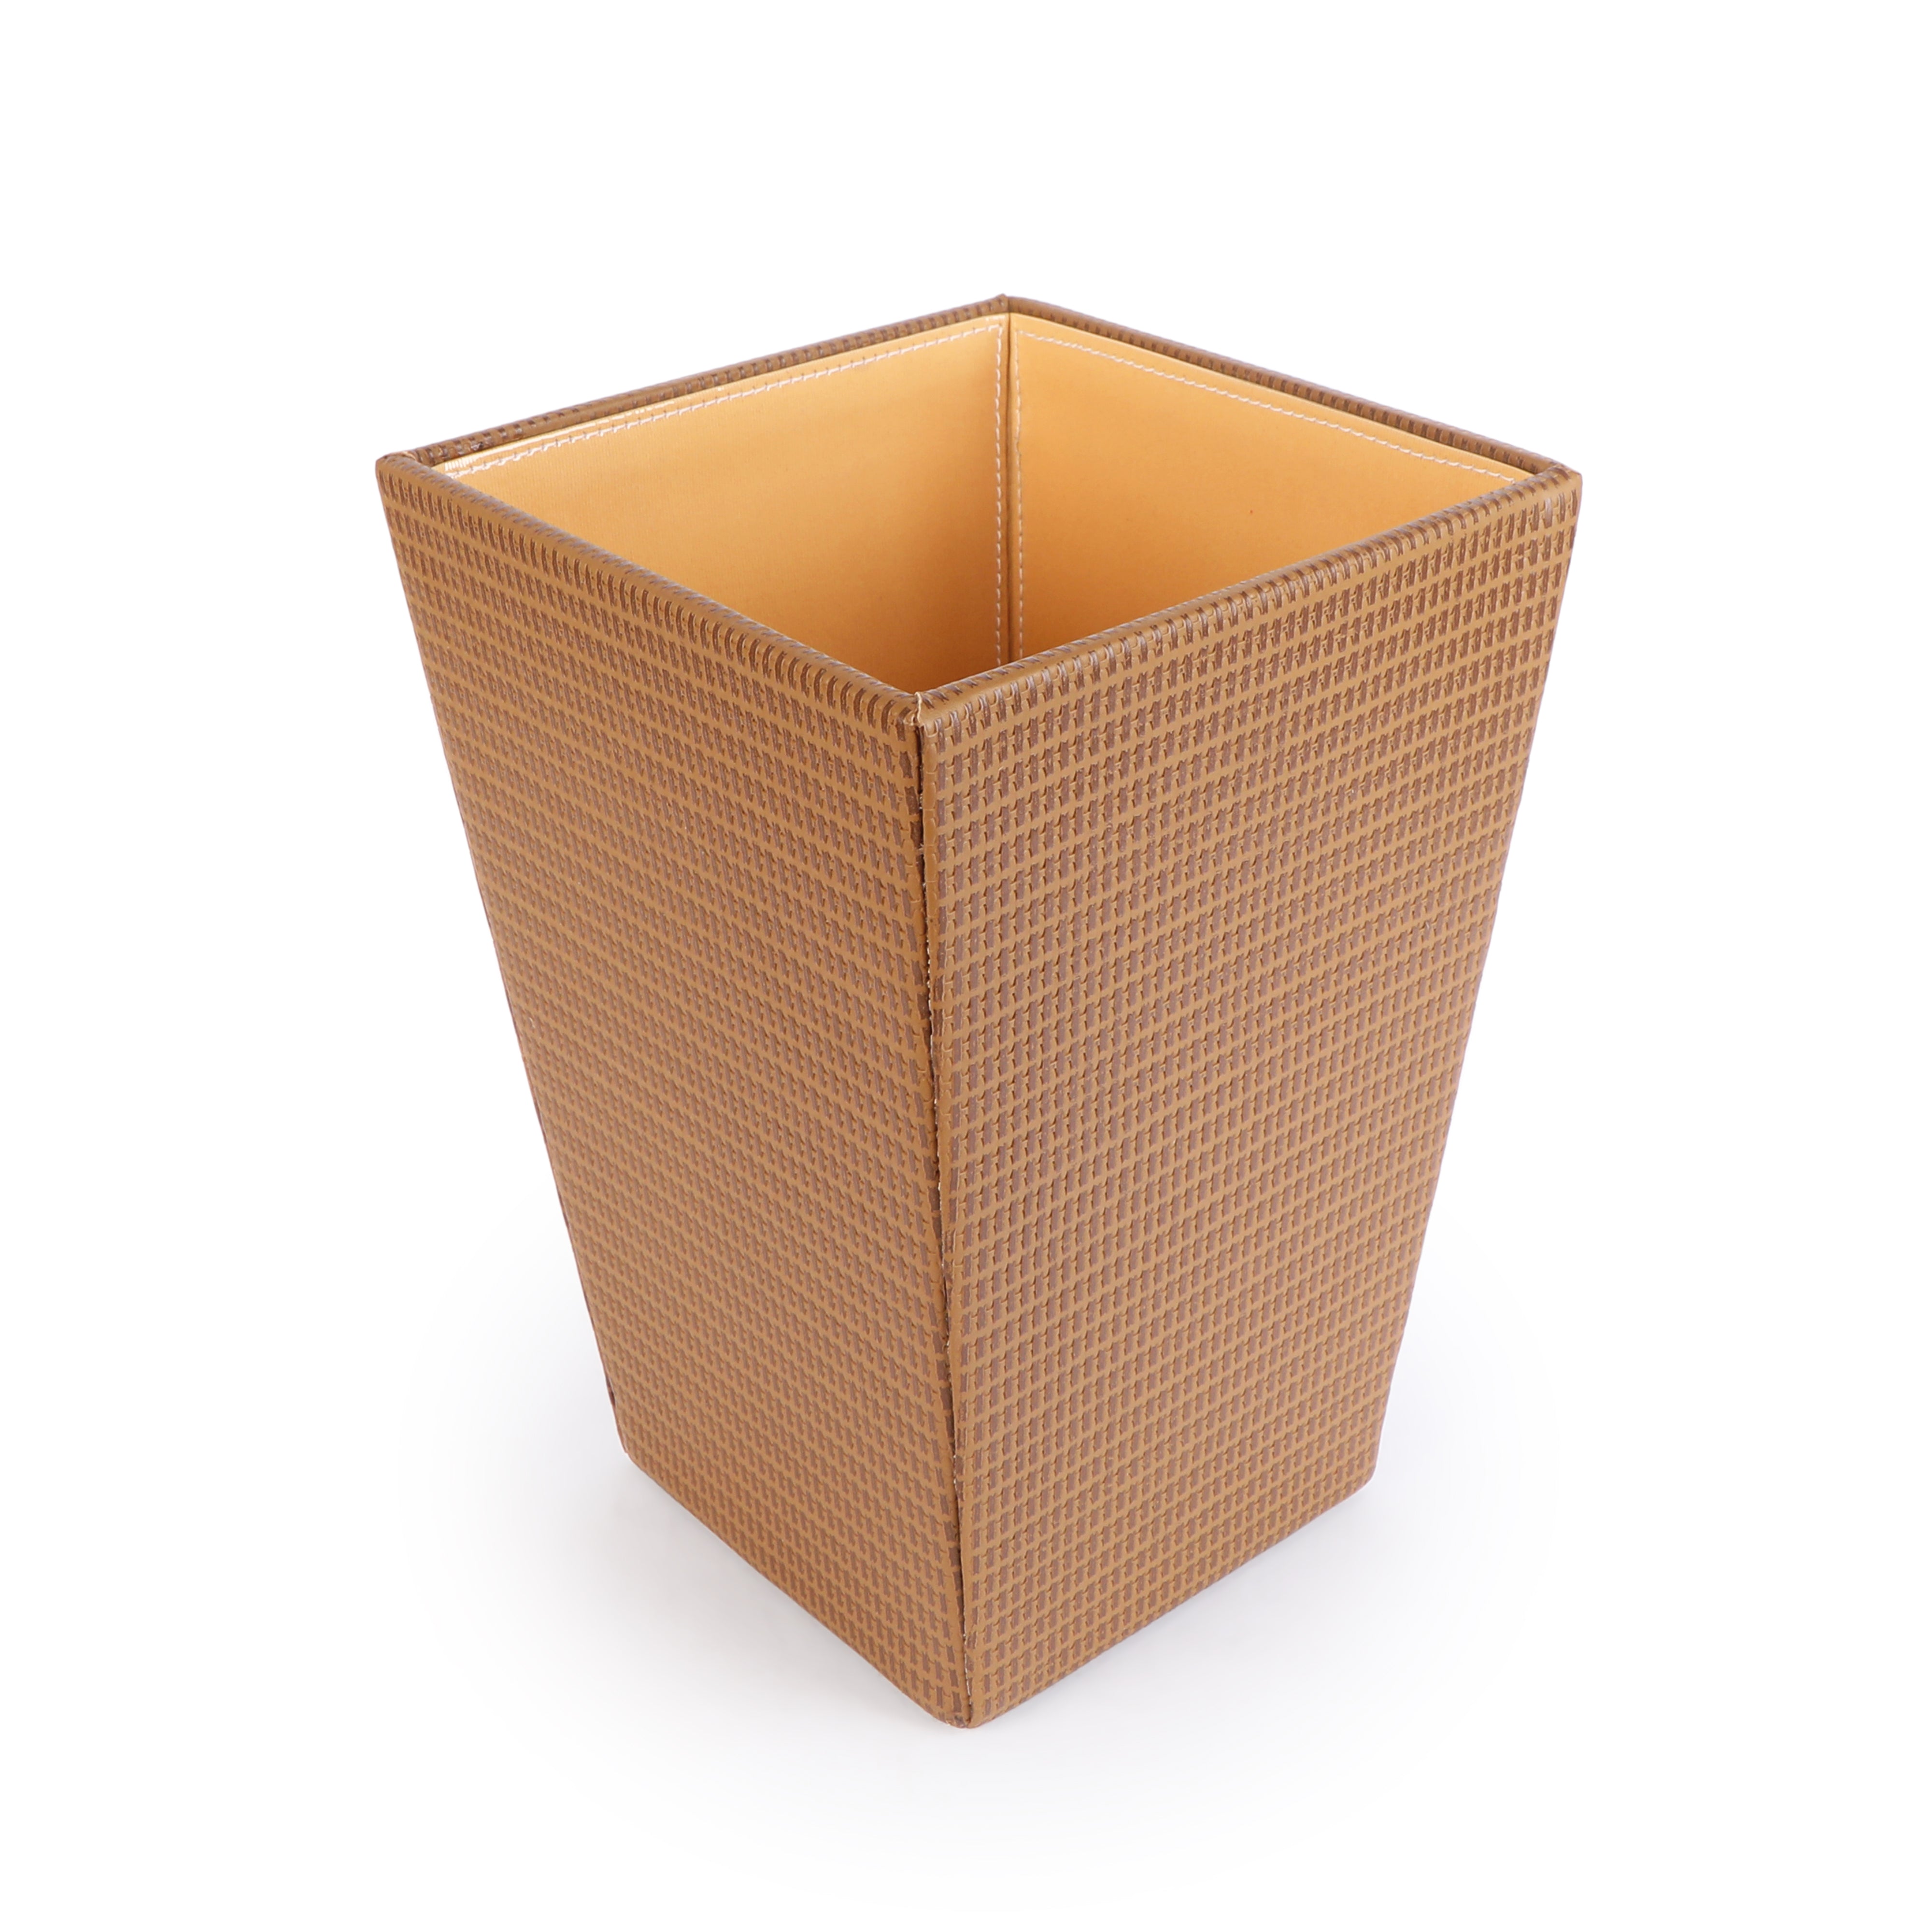 Dustbin - Brown Burberry Leatherette 3- The Home Co.